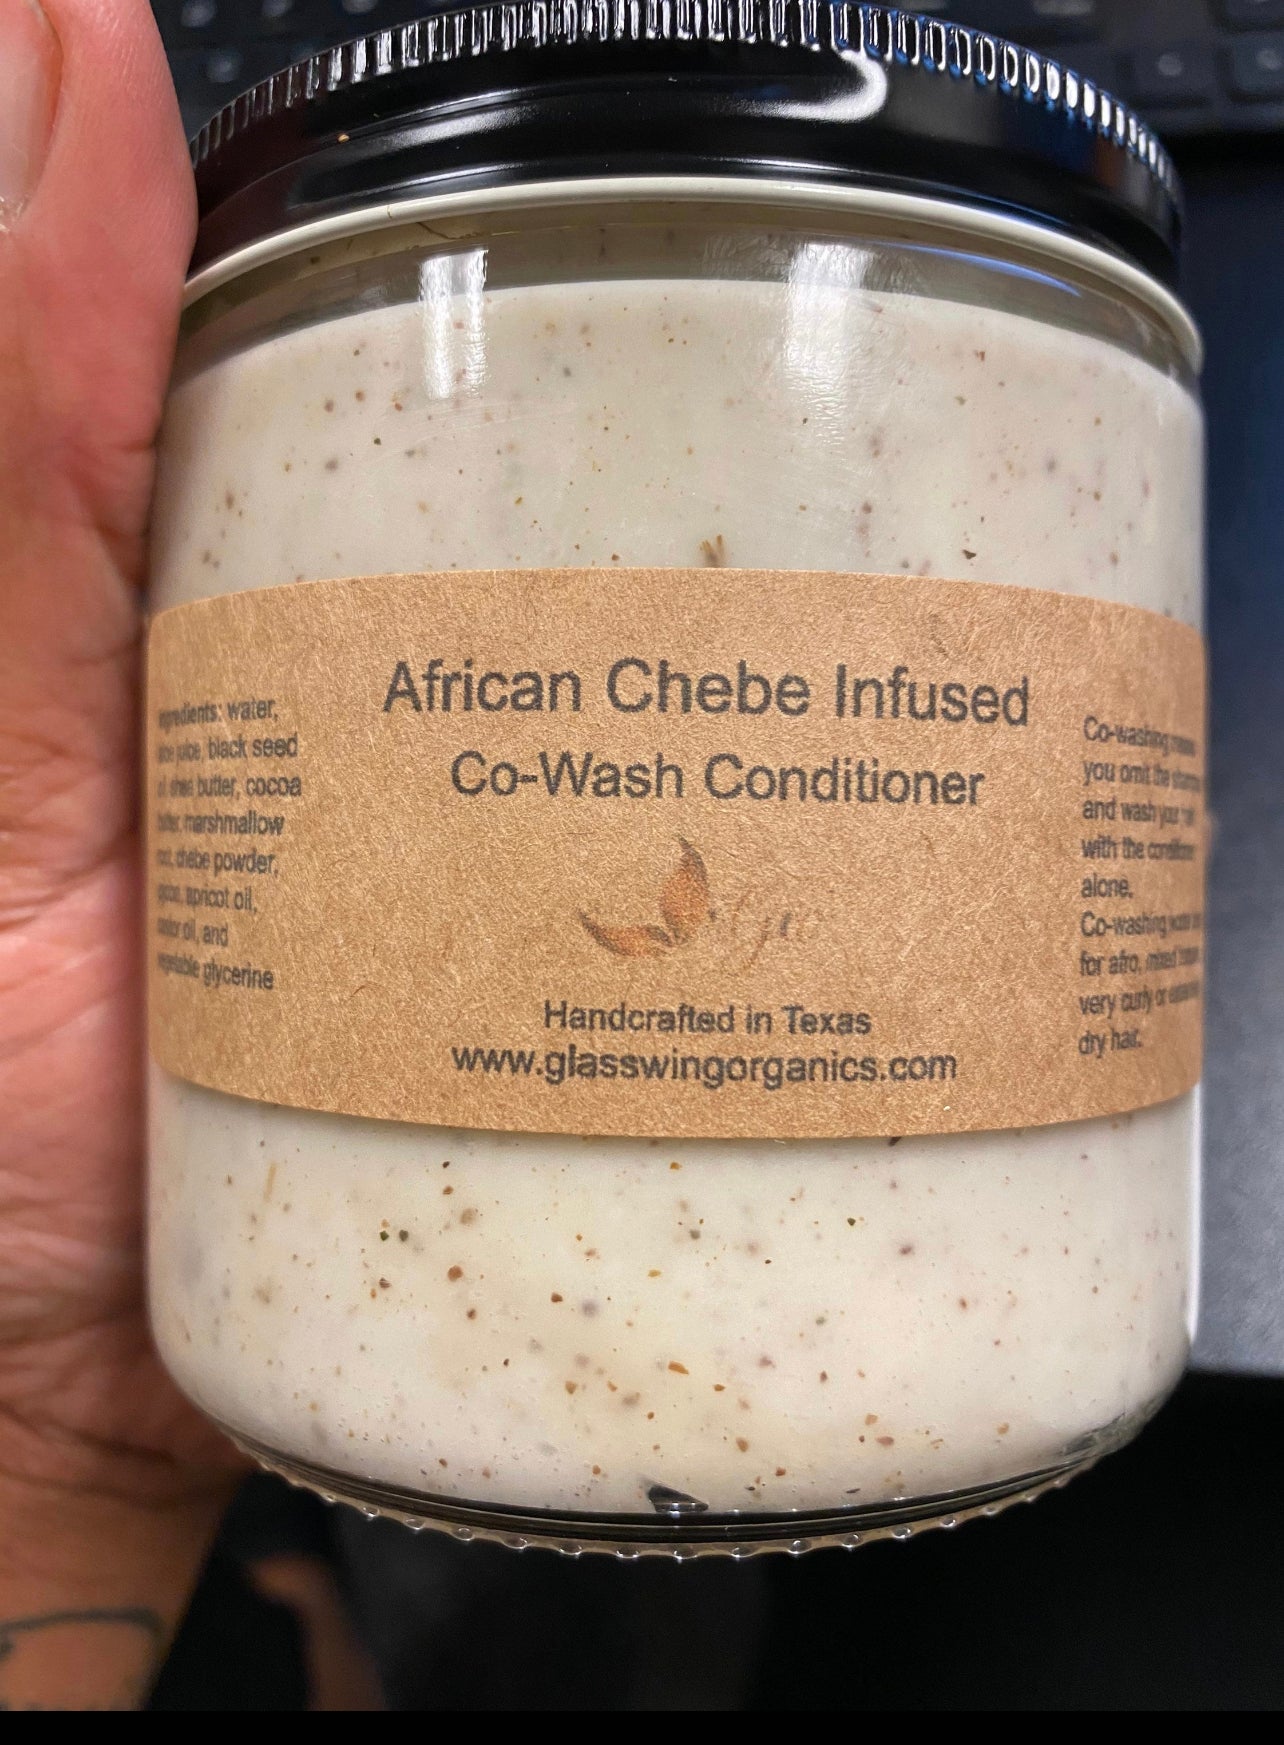 ALL NATURAL HERBAL INFUSED CO-WASH CONDITIONER